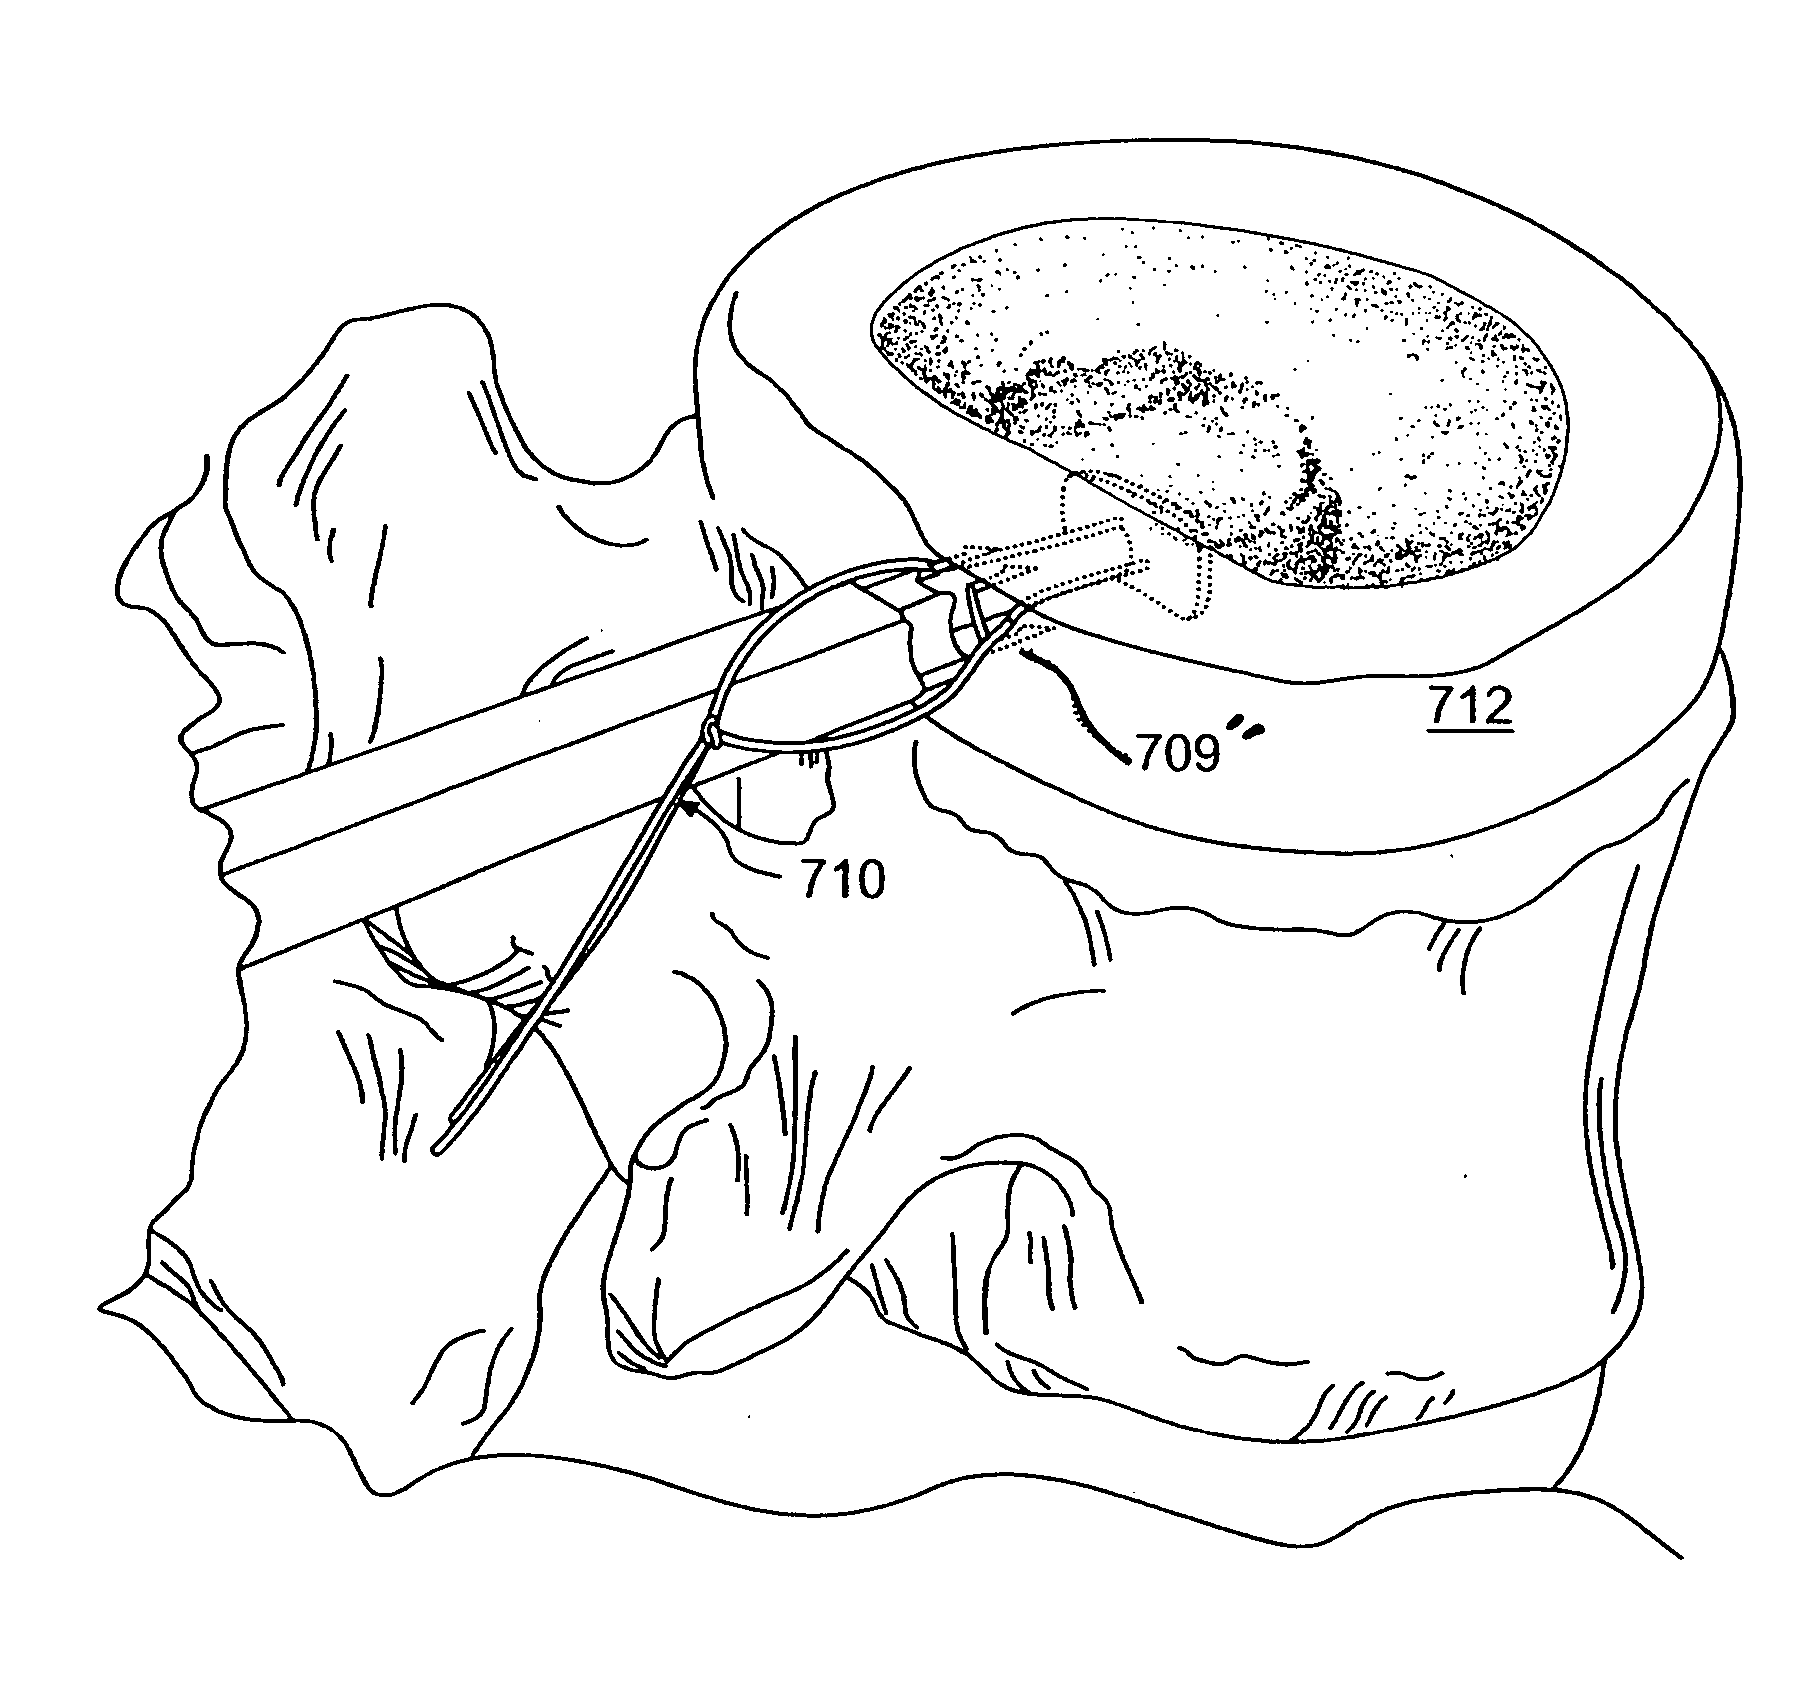 Apparatus and methods for the treatment of the intervertebral disc